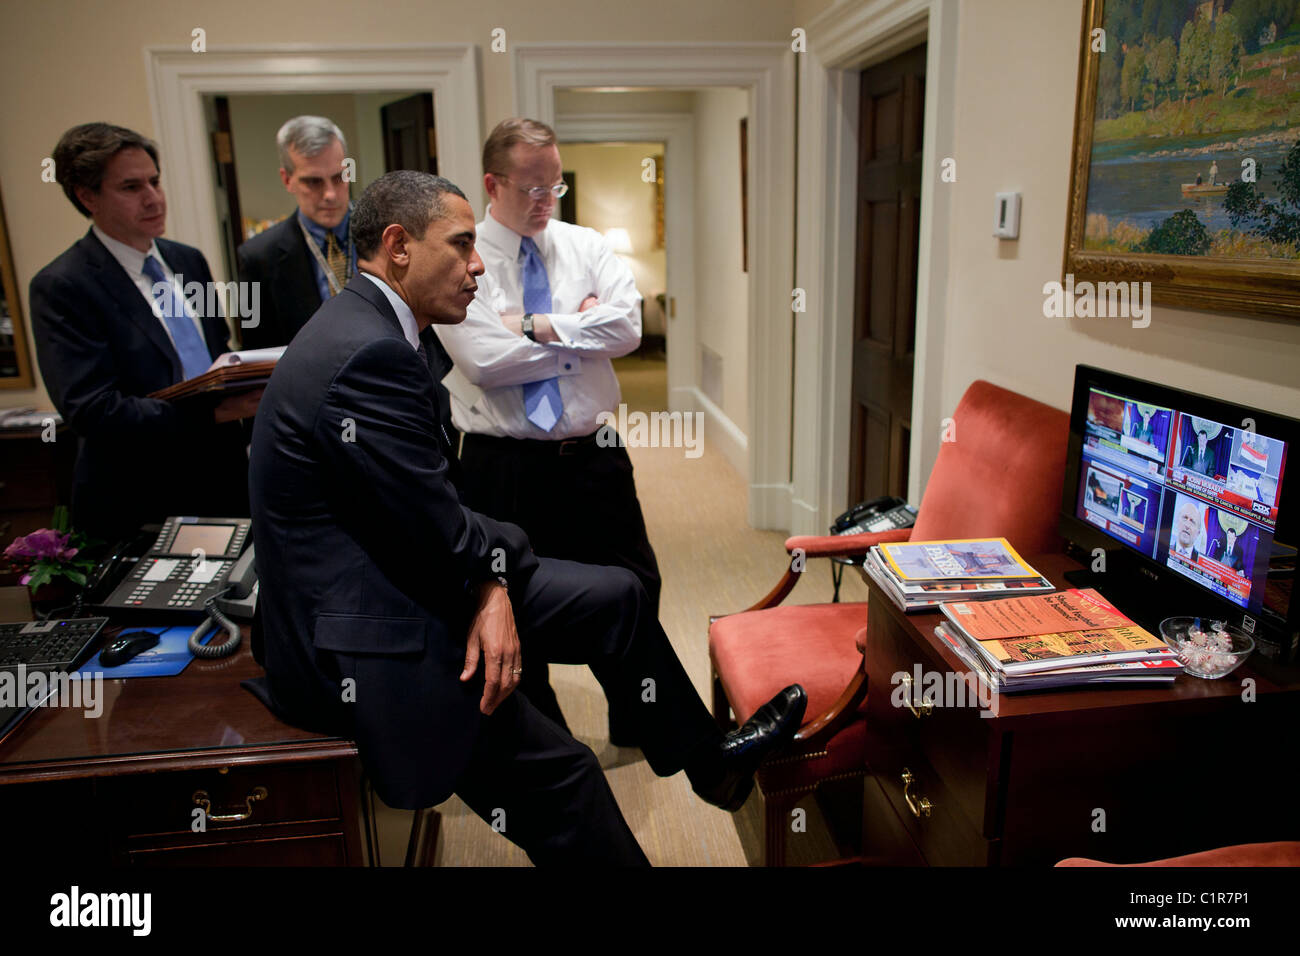 President Barack Obama watches a televised speech by President Hosni Mubarak of Egypt in the Outer Oval Office, Jan. 28, 2011. Stock Photo